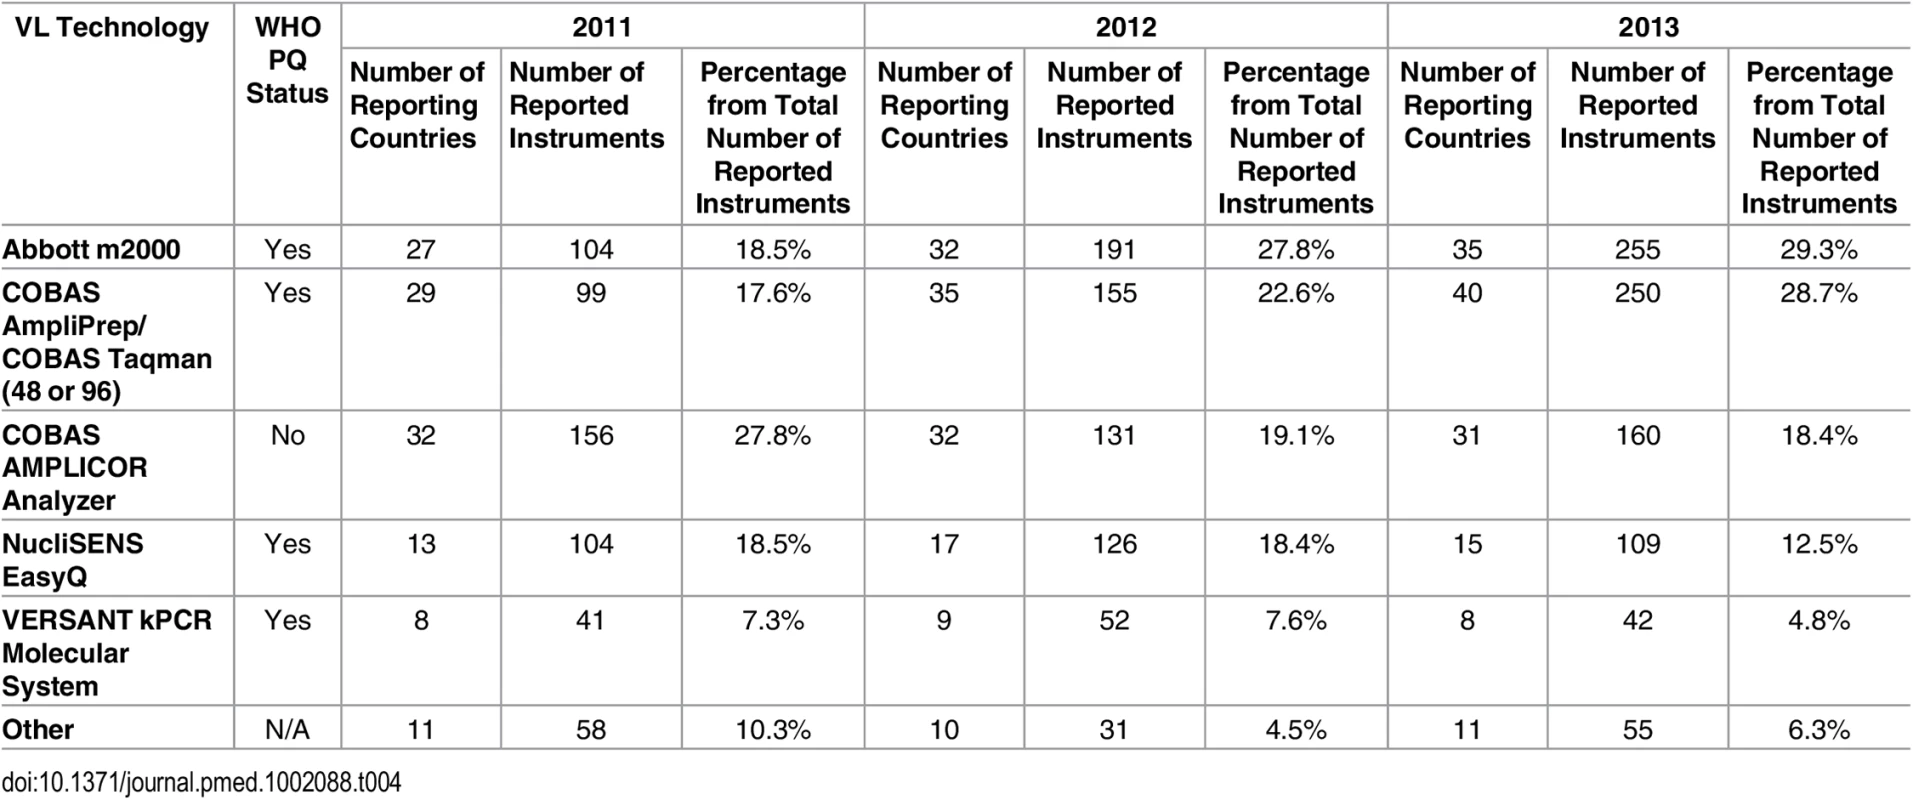 Market share by number of branded viral load (VL) technologies in 2011, 2012, and 2013 for all responding countries.